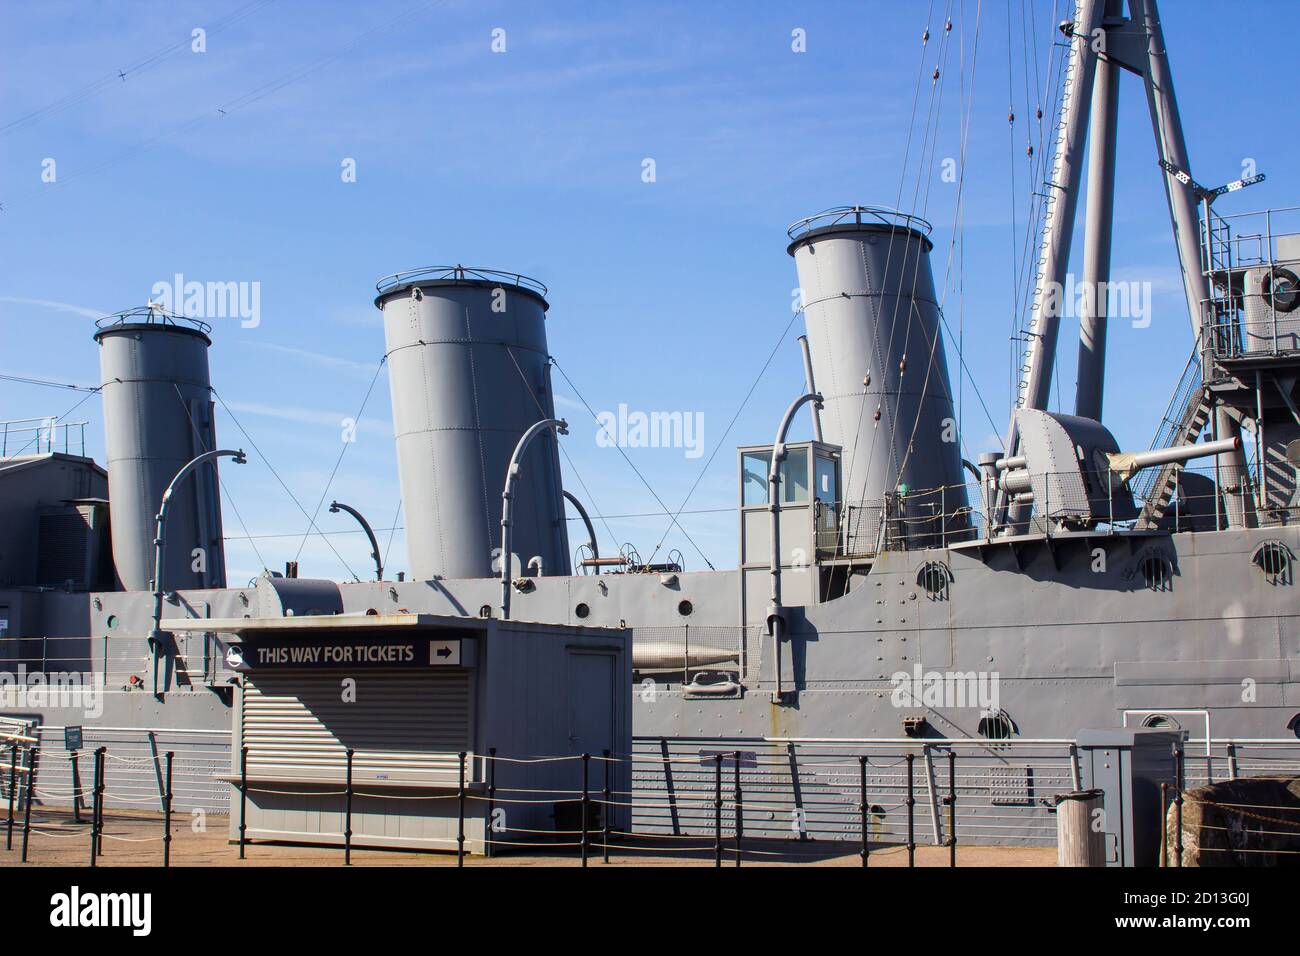 27 September 2020 HMS Caroline, a decommissioned C-class light cruiser of the Royal Navy, now a National Museum ship permanently berthed in the Alexan Stock Photo